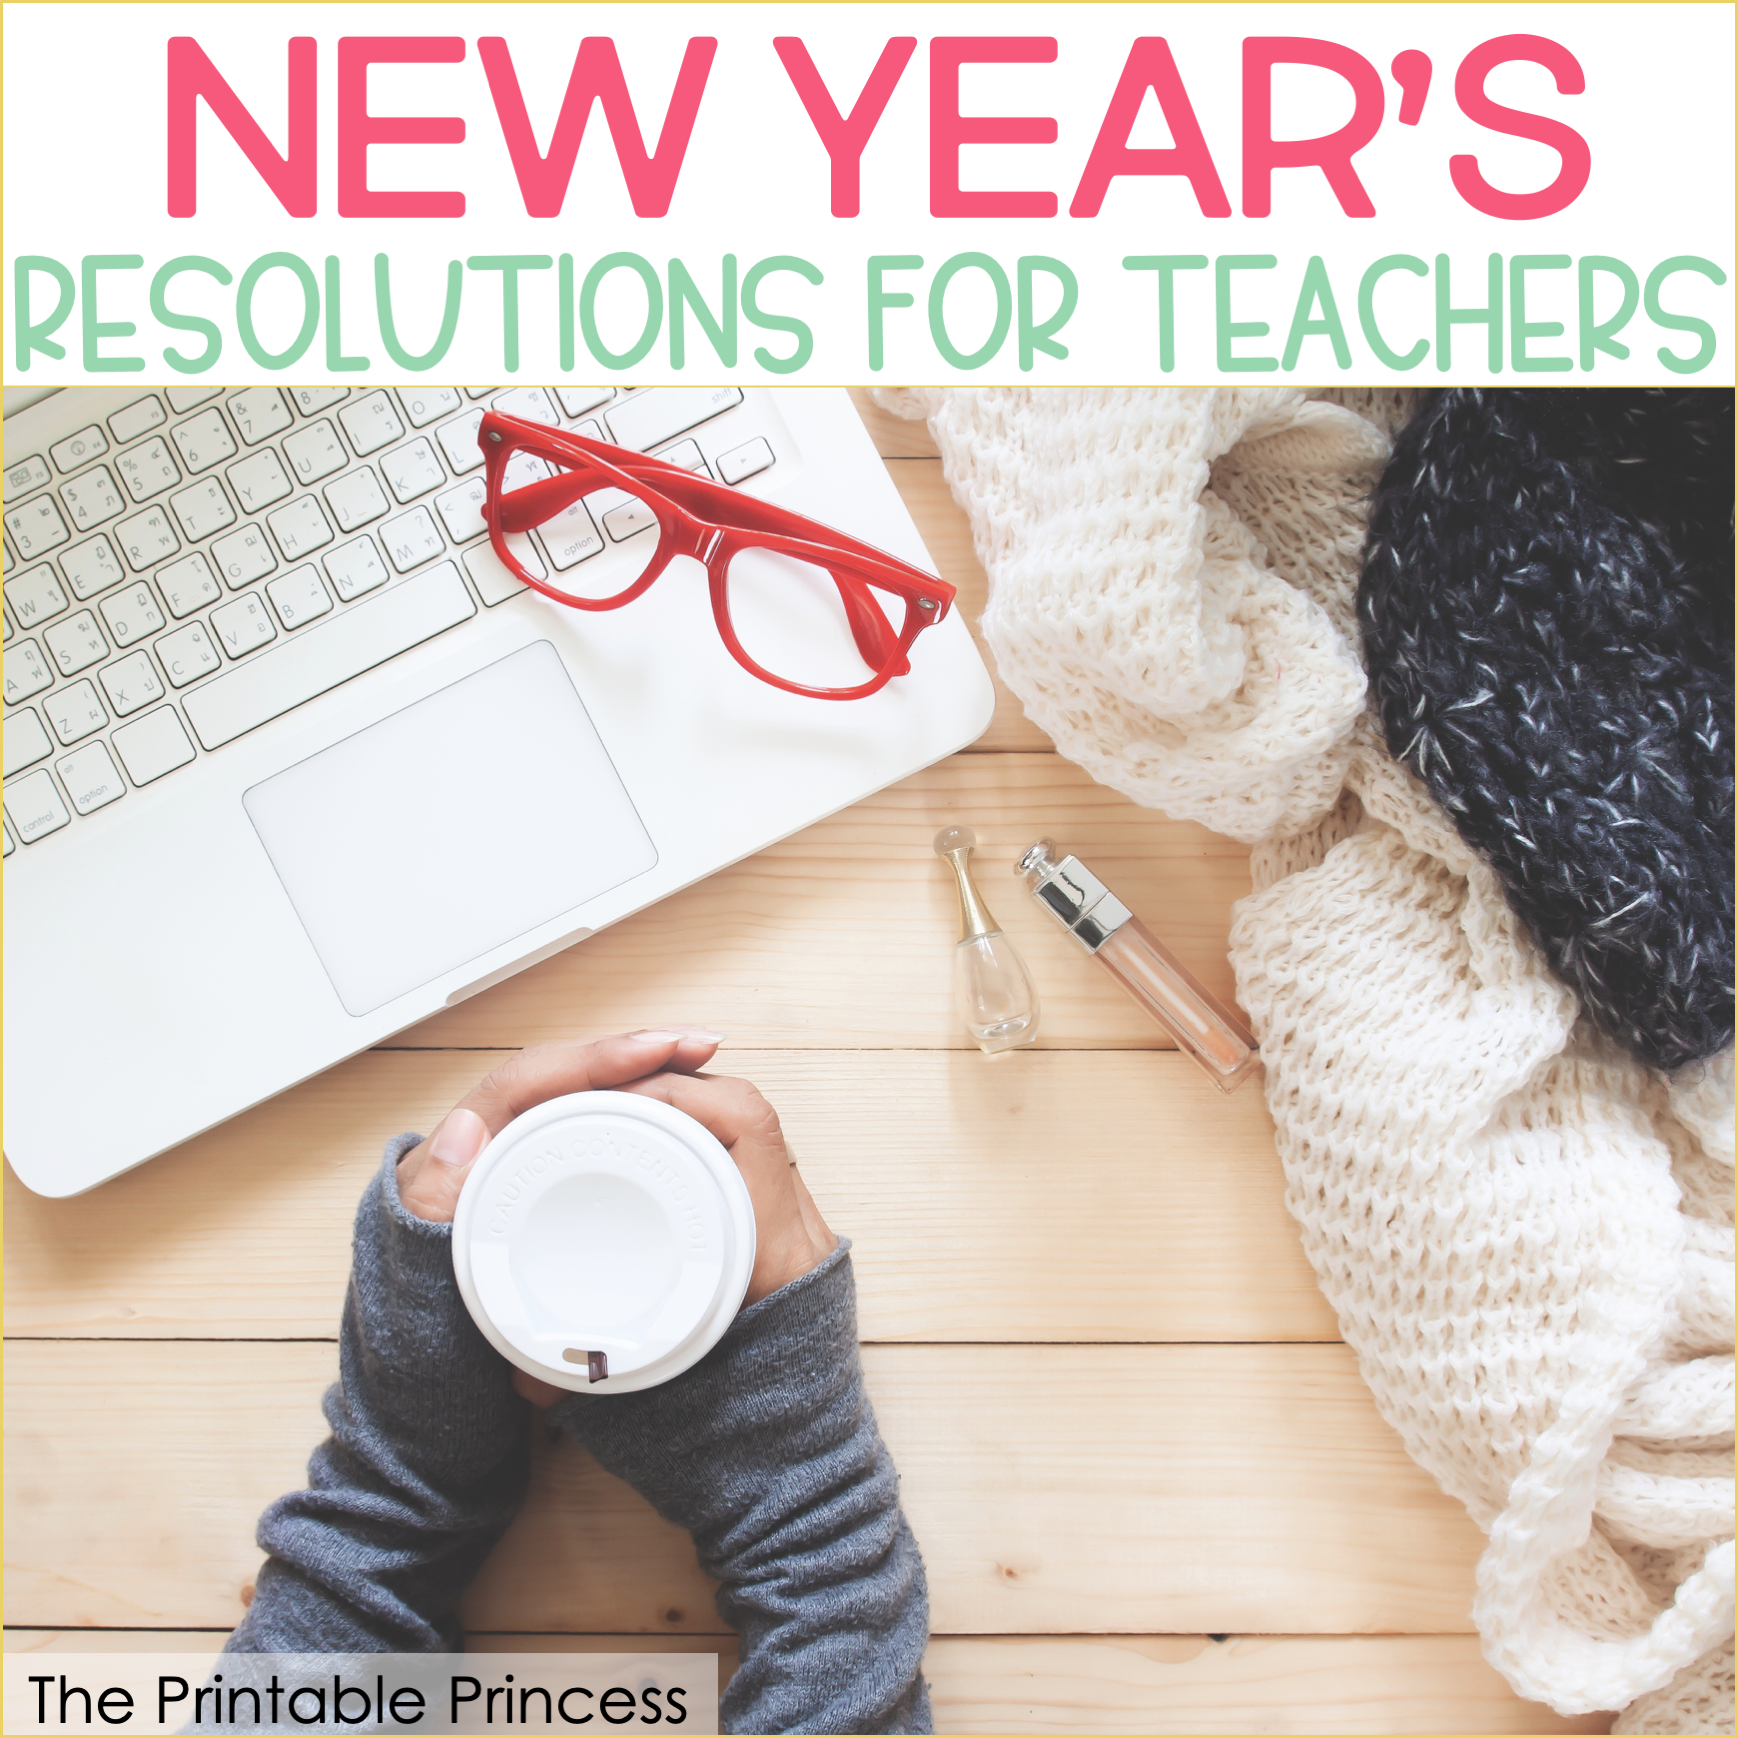 10 New Year’s Resolutions for Teachers